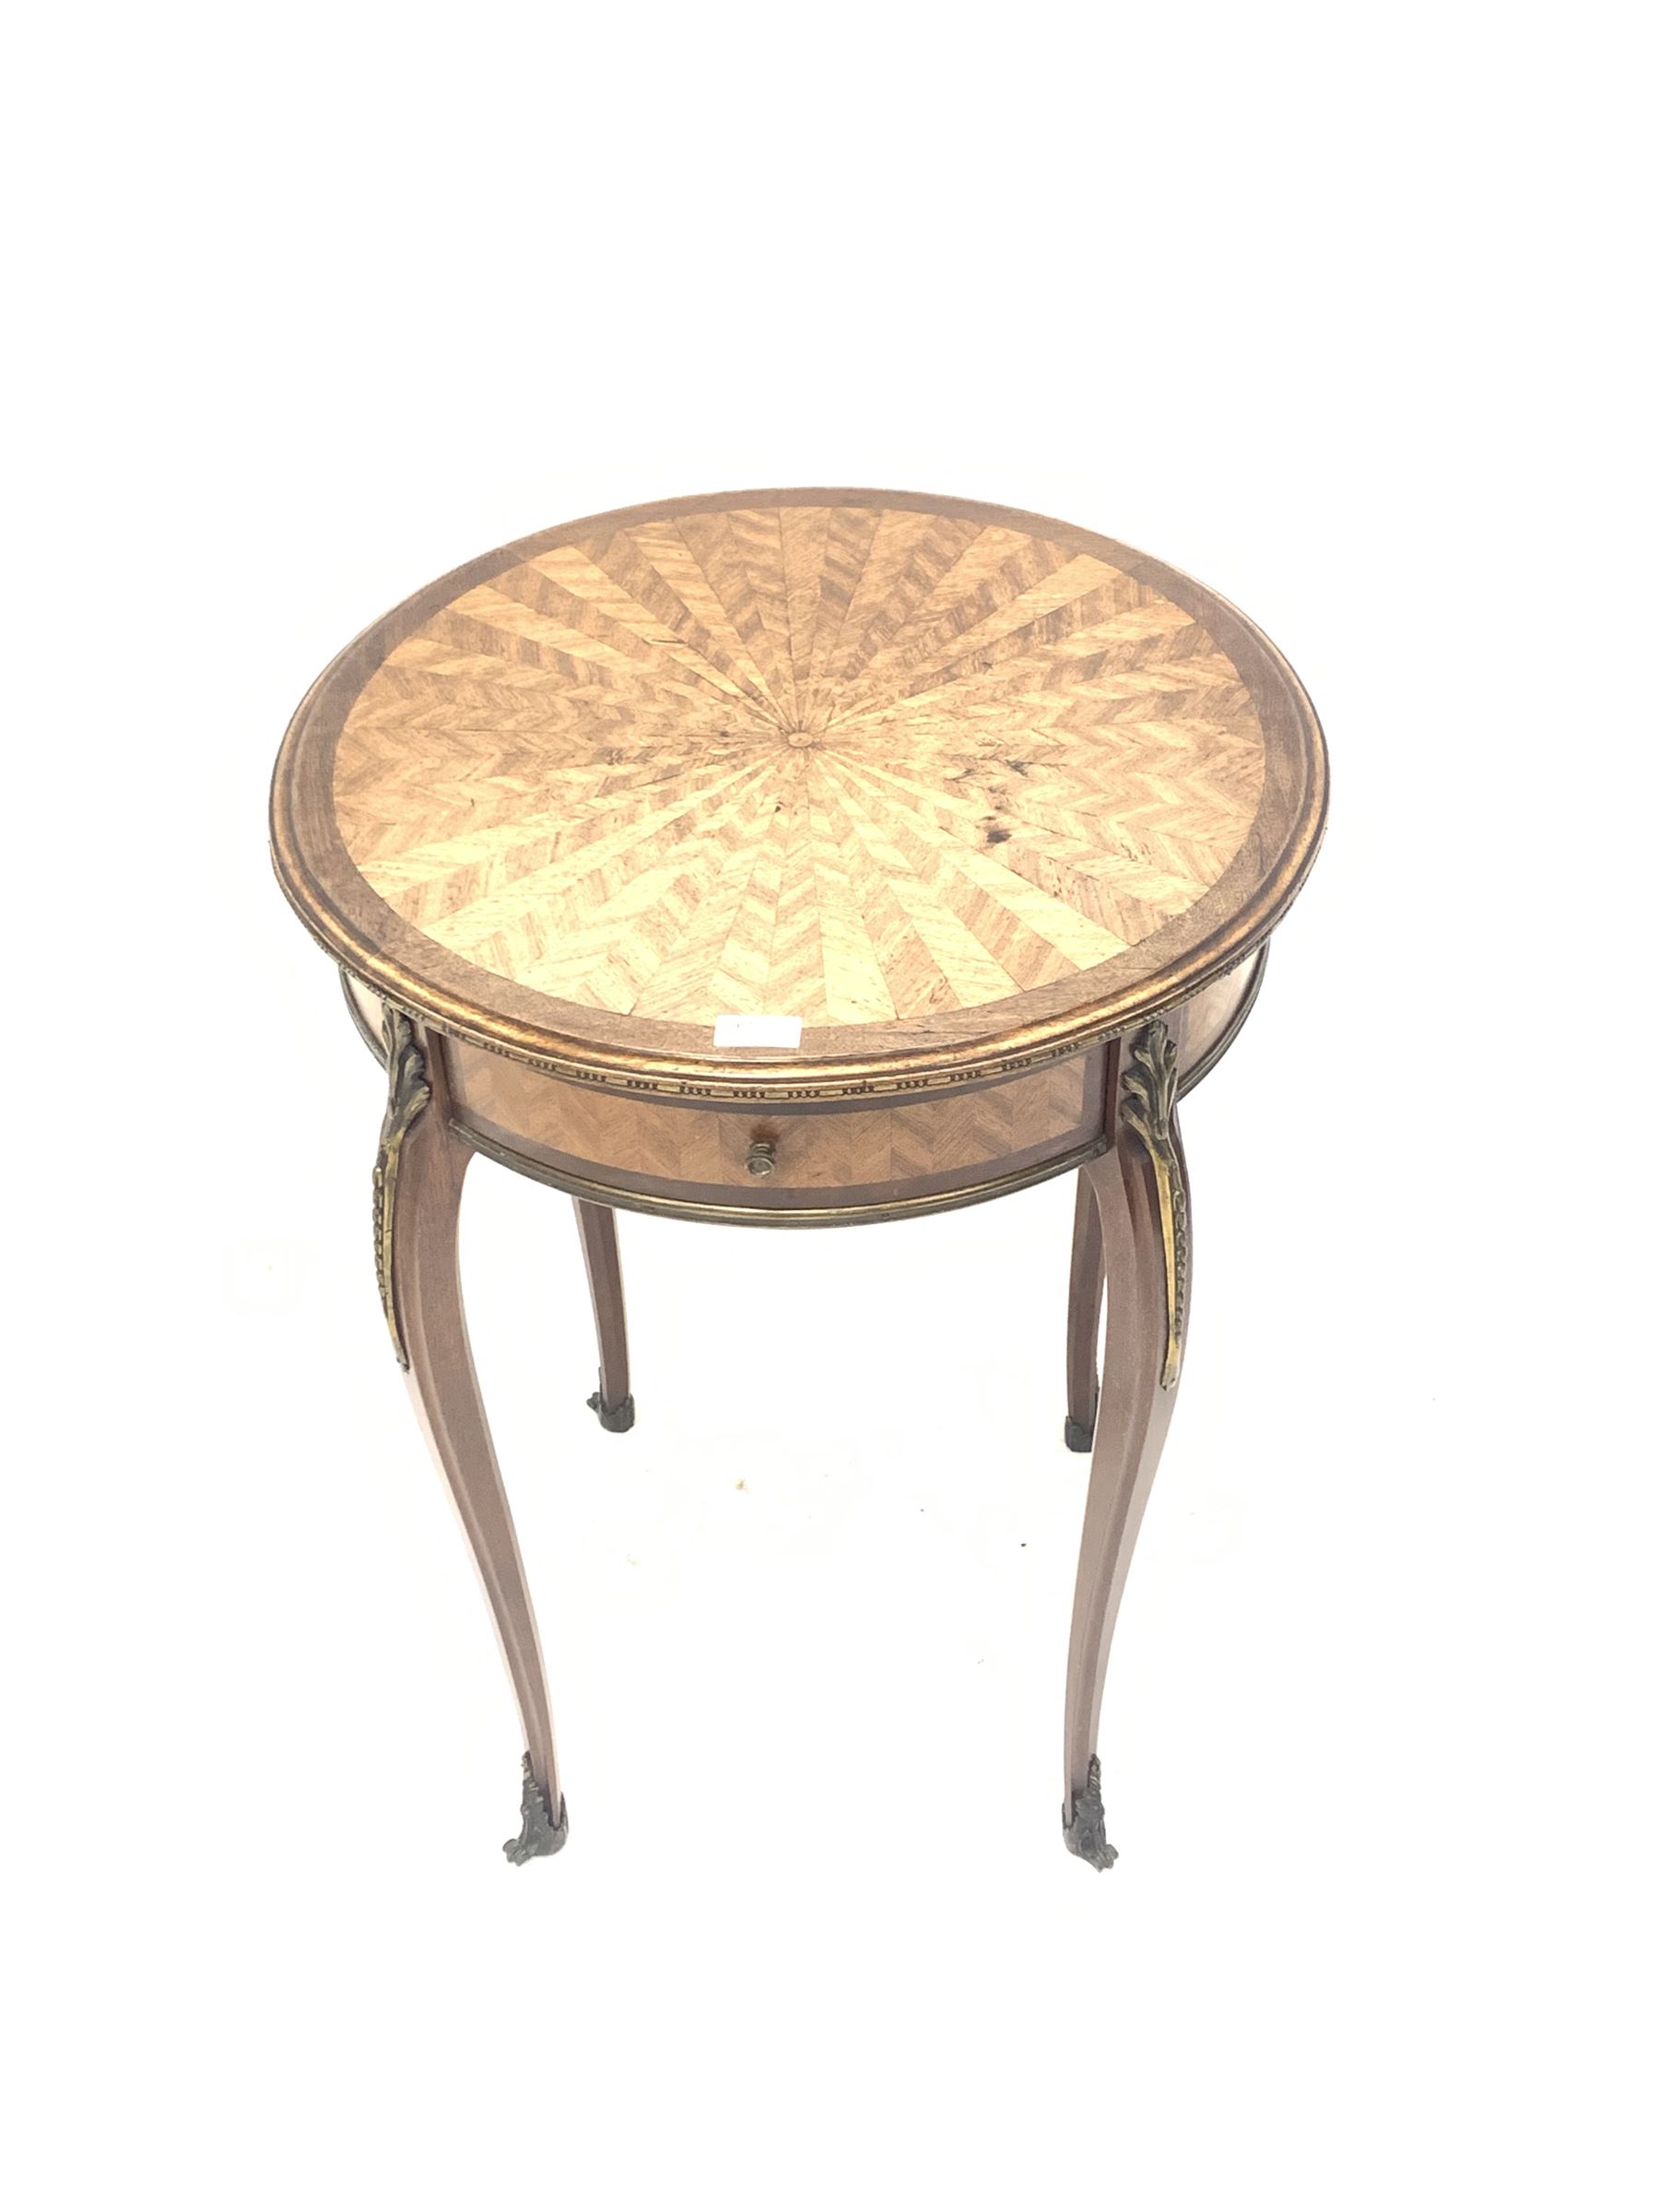 Early 20th century French kingwood and walnut occasional table - Image 2 of 4